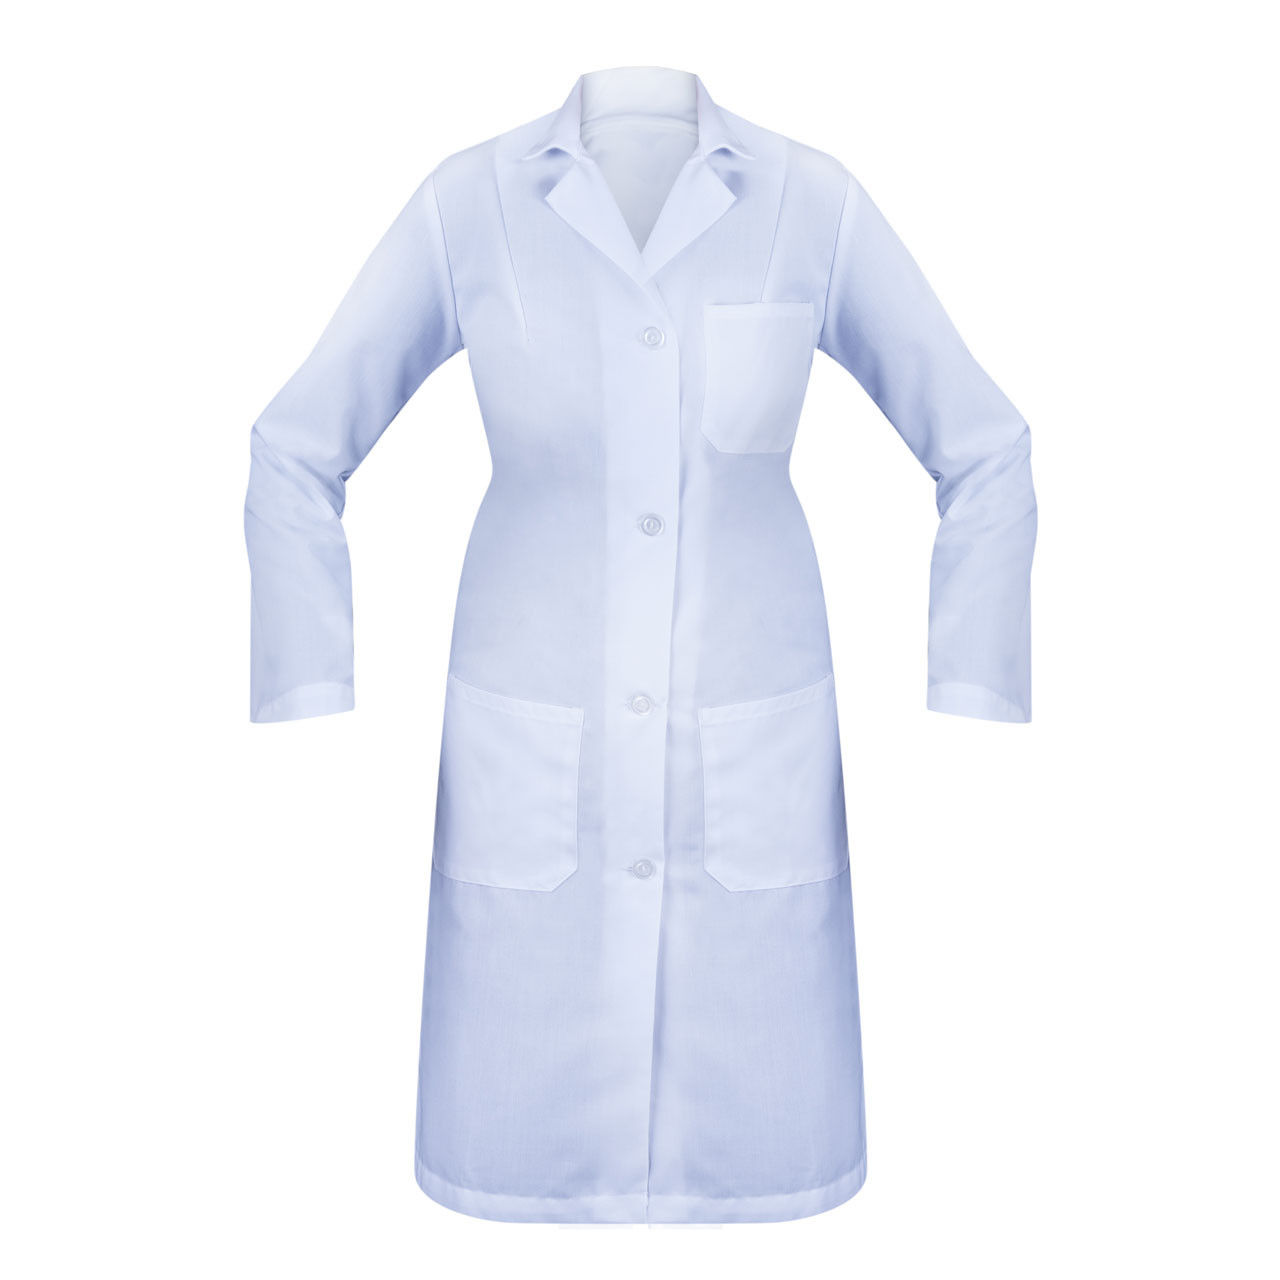 Female Lab Coat, 3 Pocket, LS, Buttons Questions & Answers